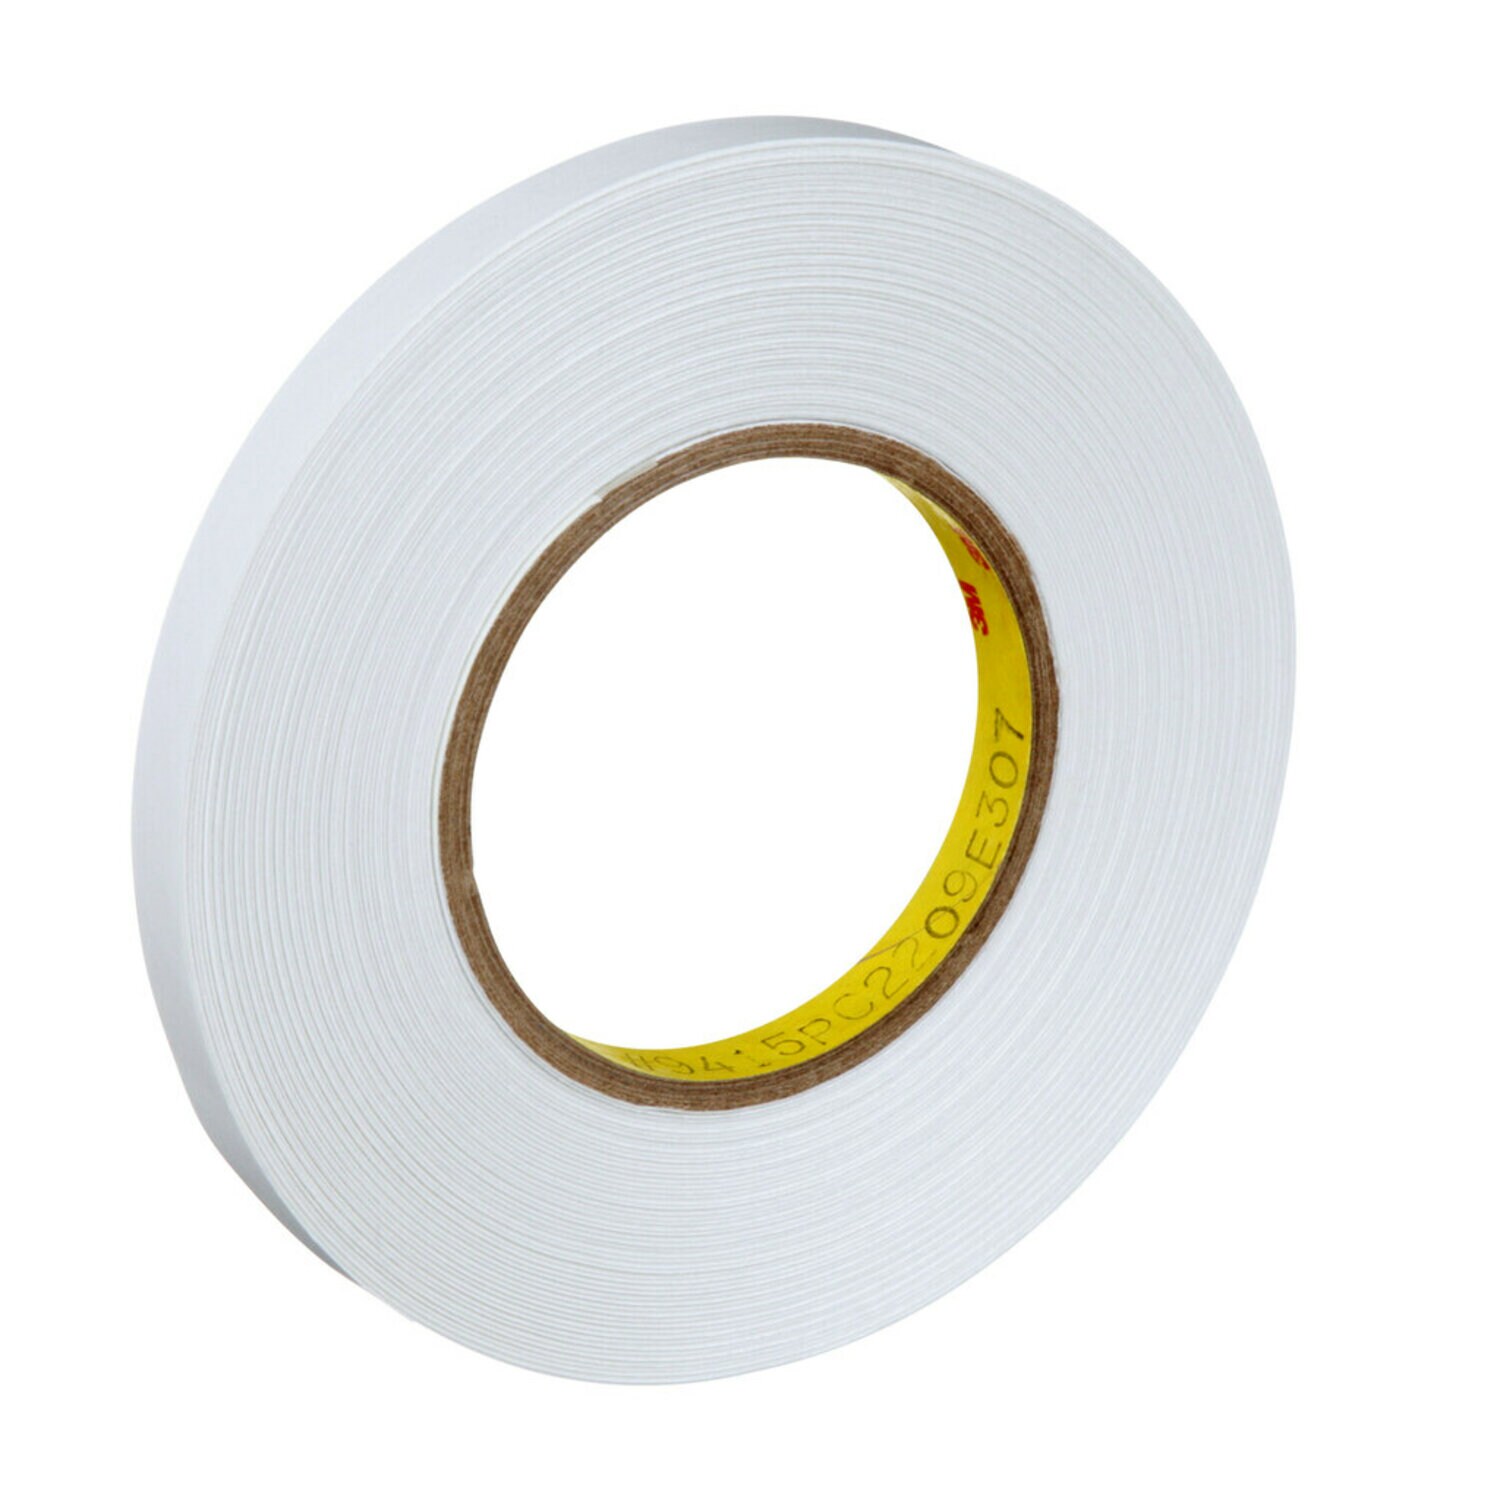 7000028937 - 3M Removable Repositionable Tape 9415PC, Clear, 3/8 in x 72 yd, 2 mil,
96 Rolls/Case